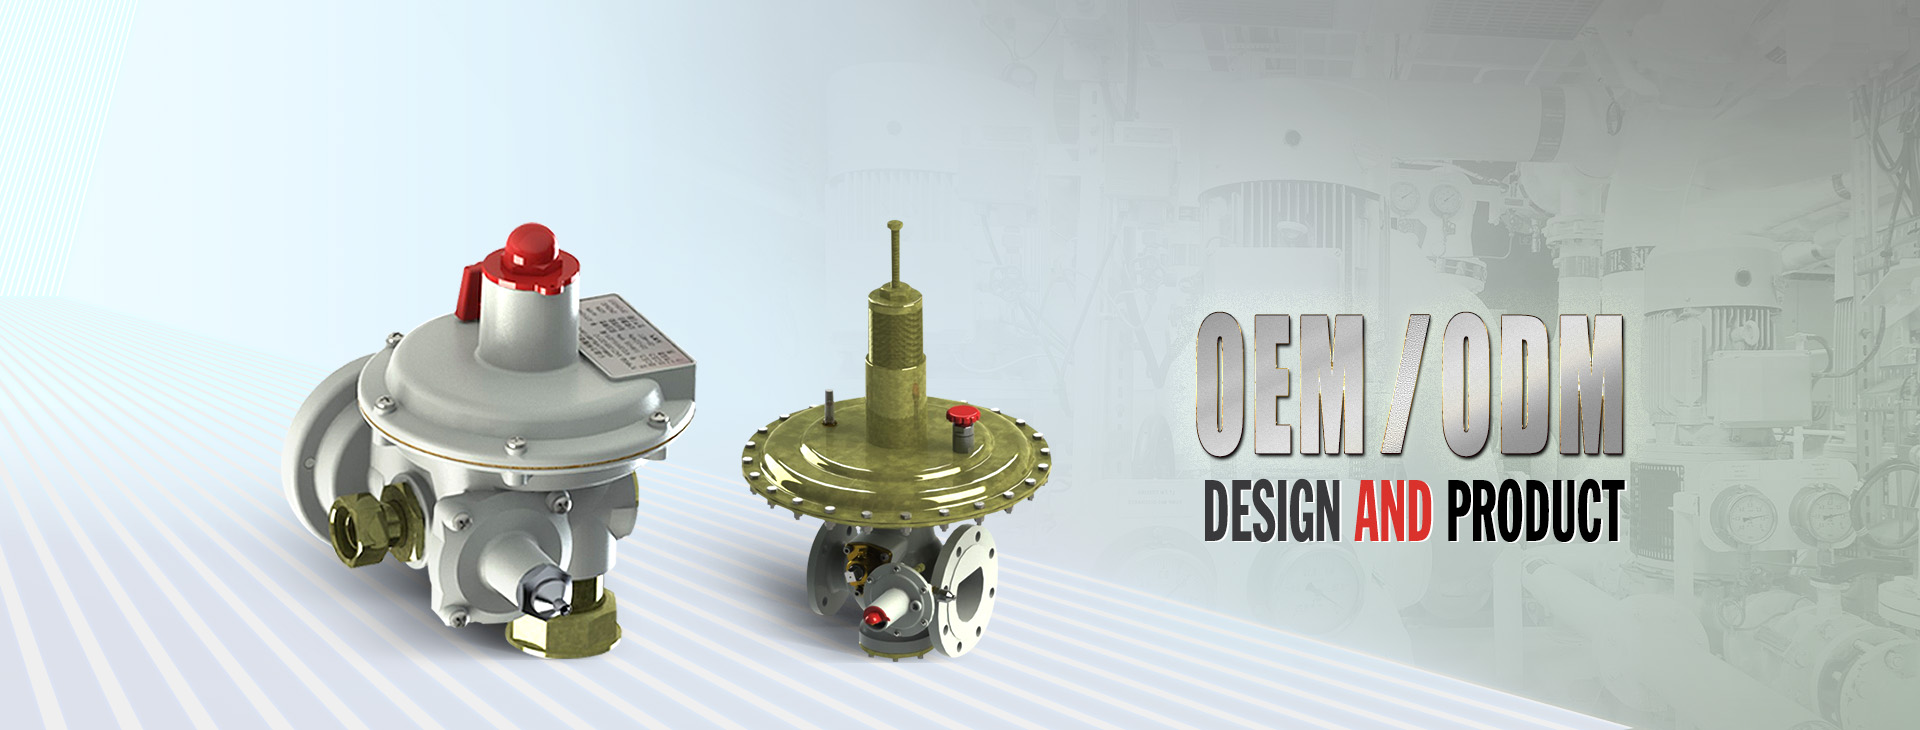 OEM ODM  DESIGN AND PRODUCT